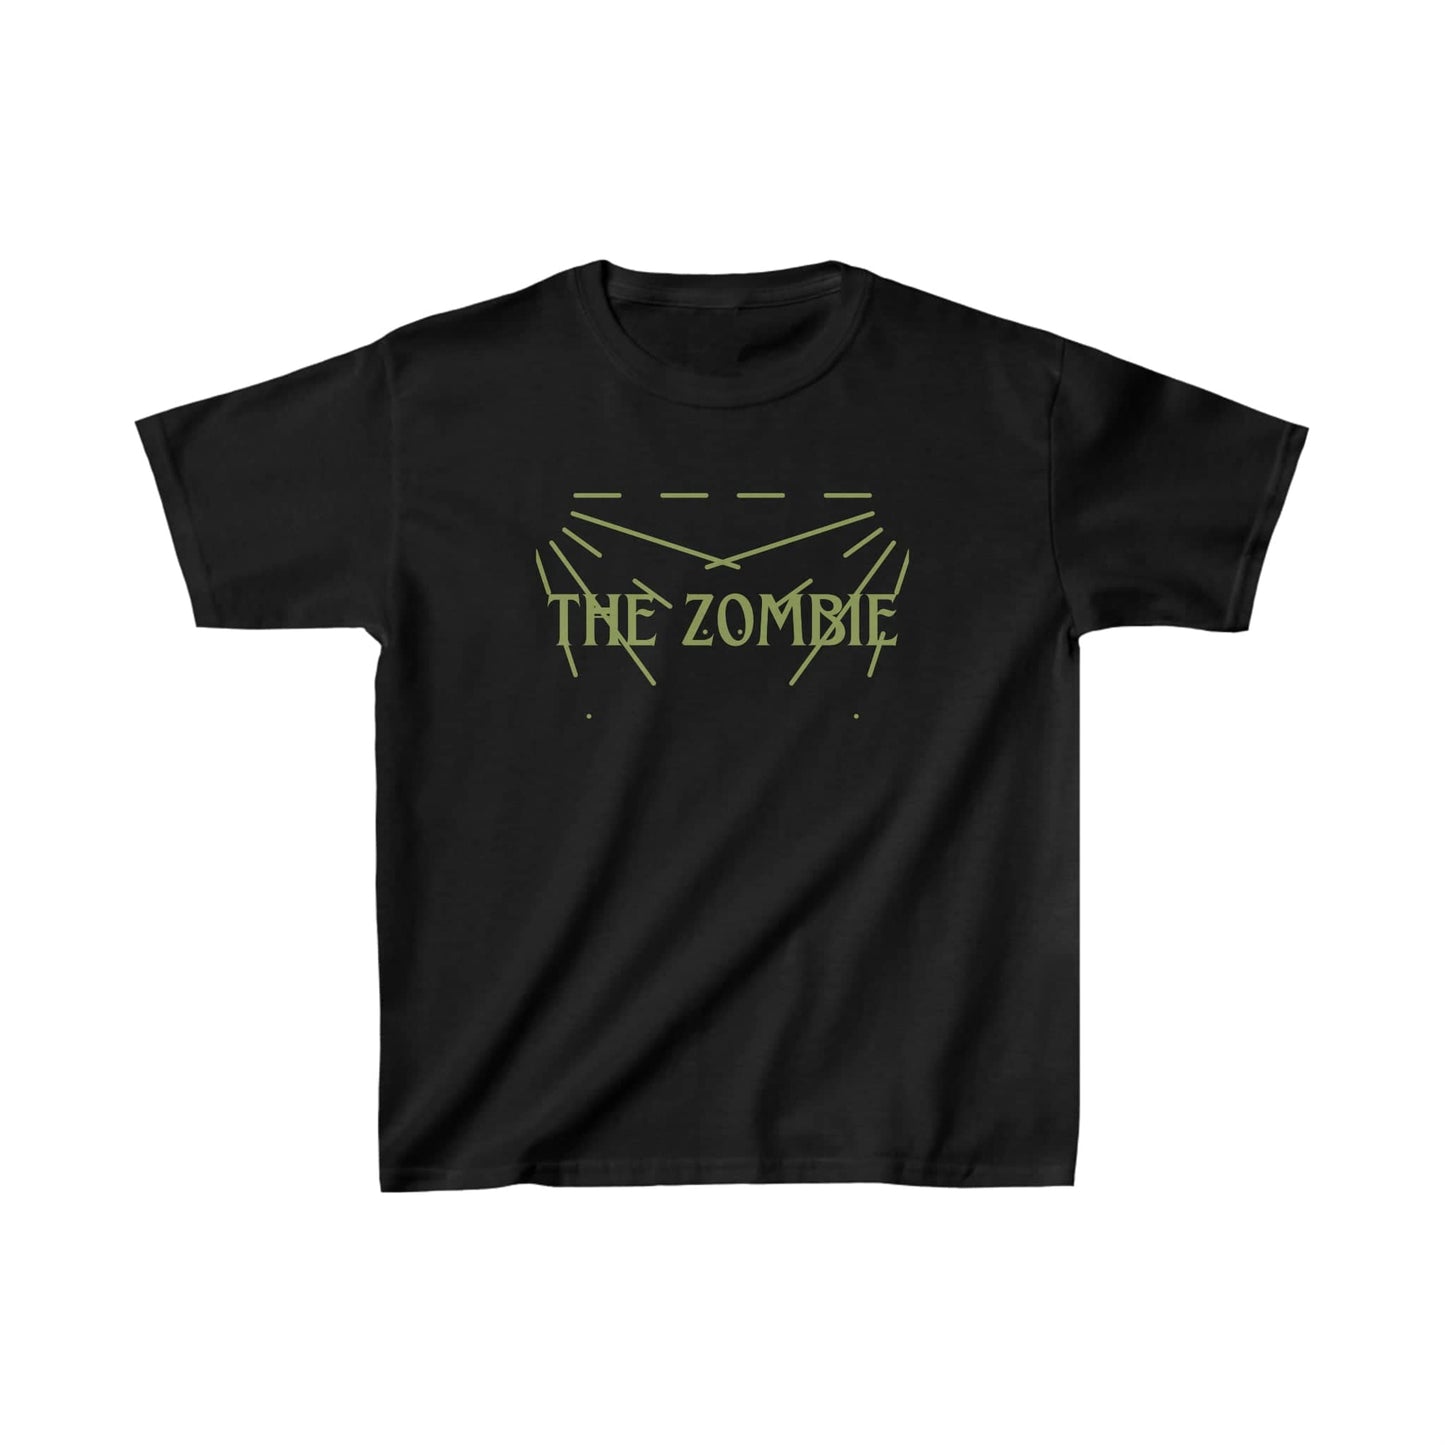 🧟 The Zombie: Unleash the Undead Style with this Spine-Chilling Tee! Kids clothes Bigger Than Life XS Black 